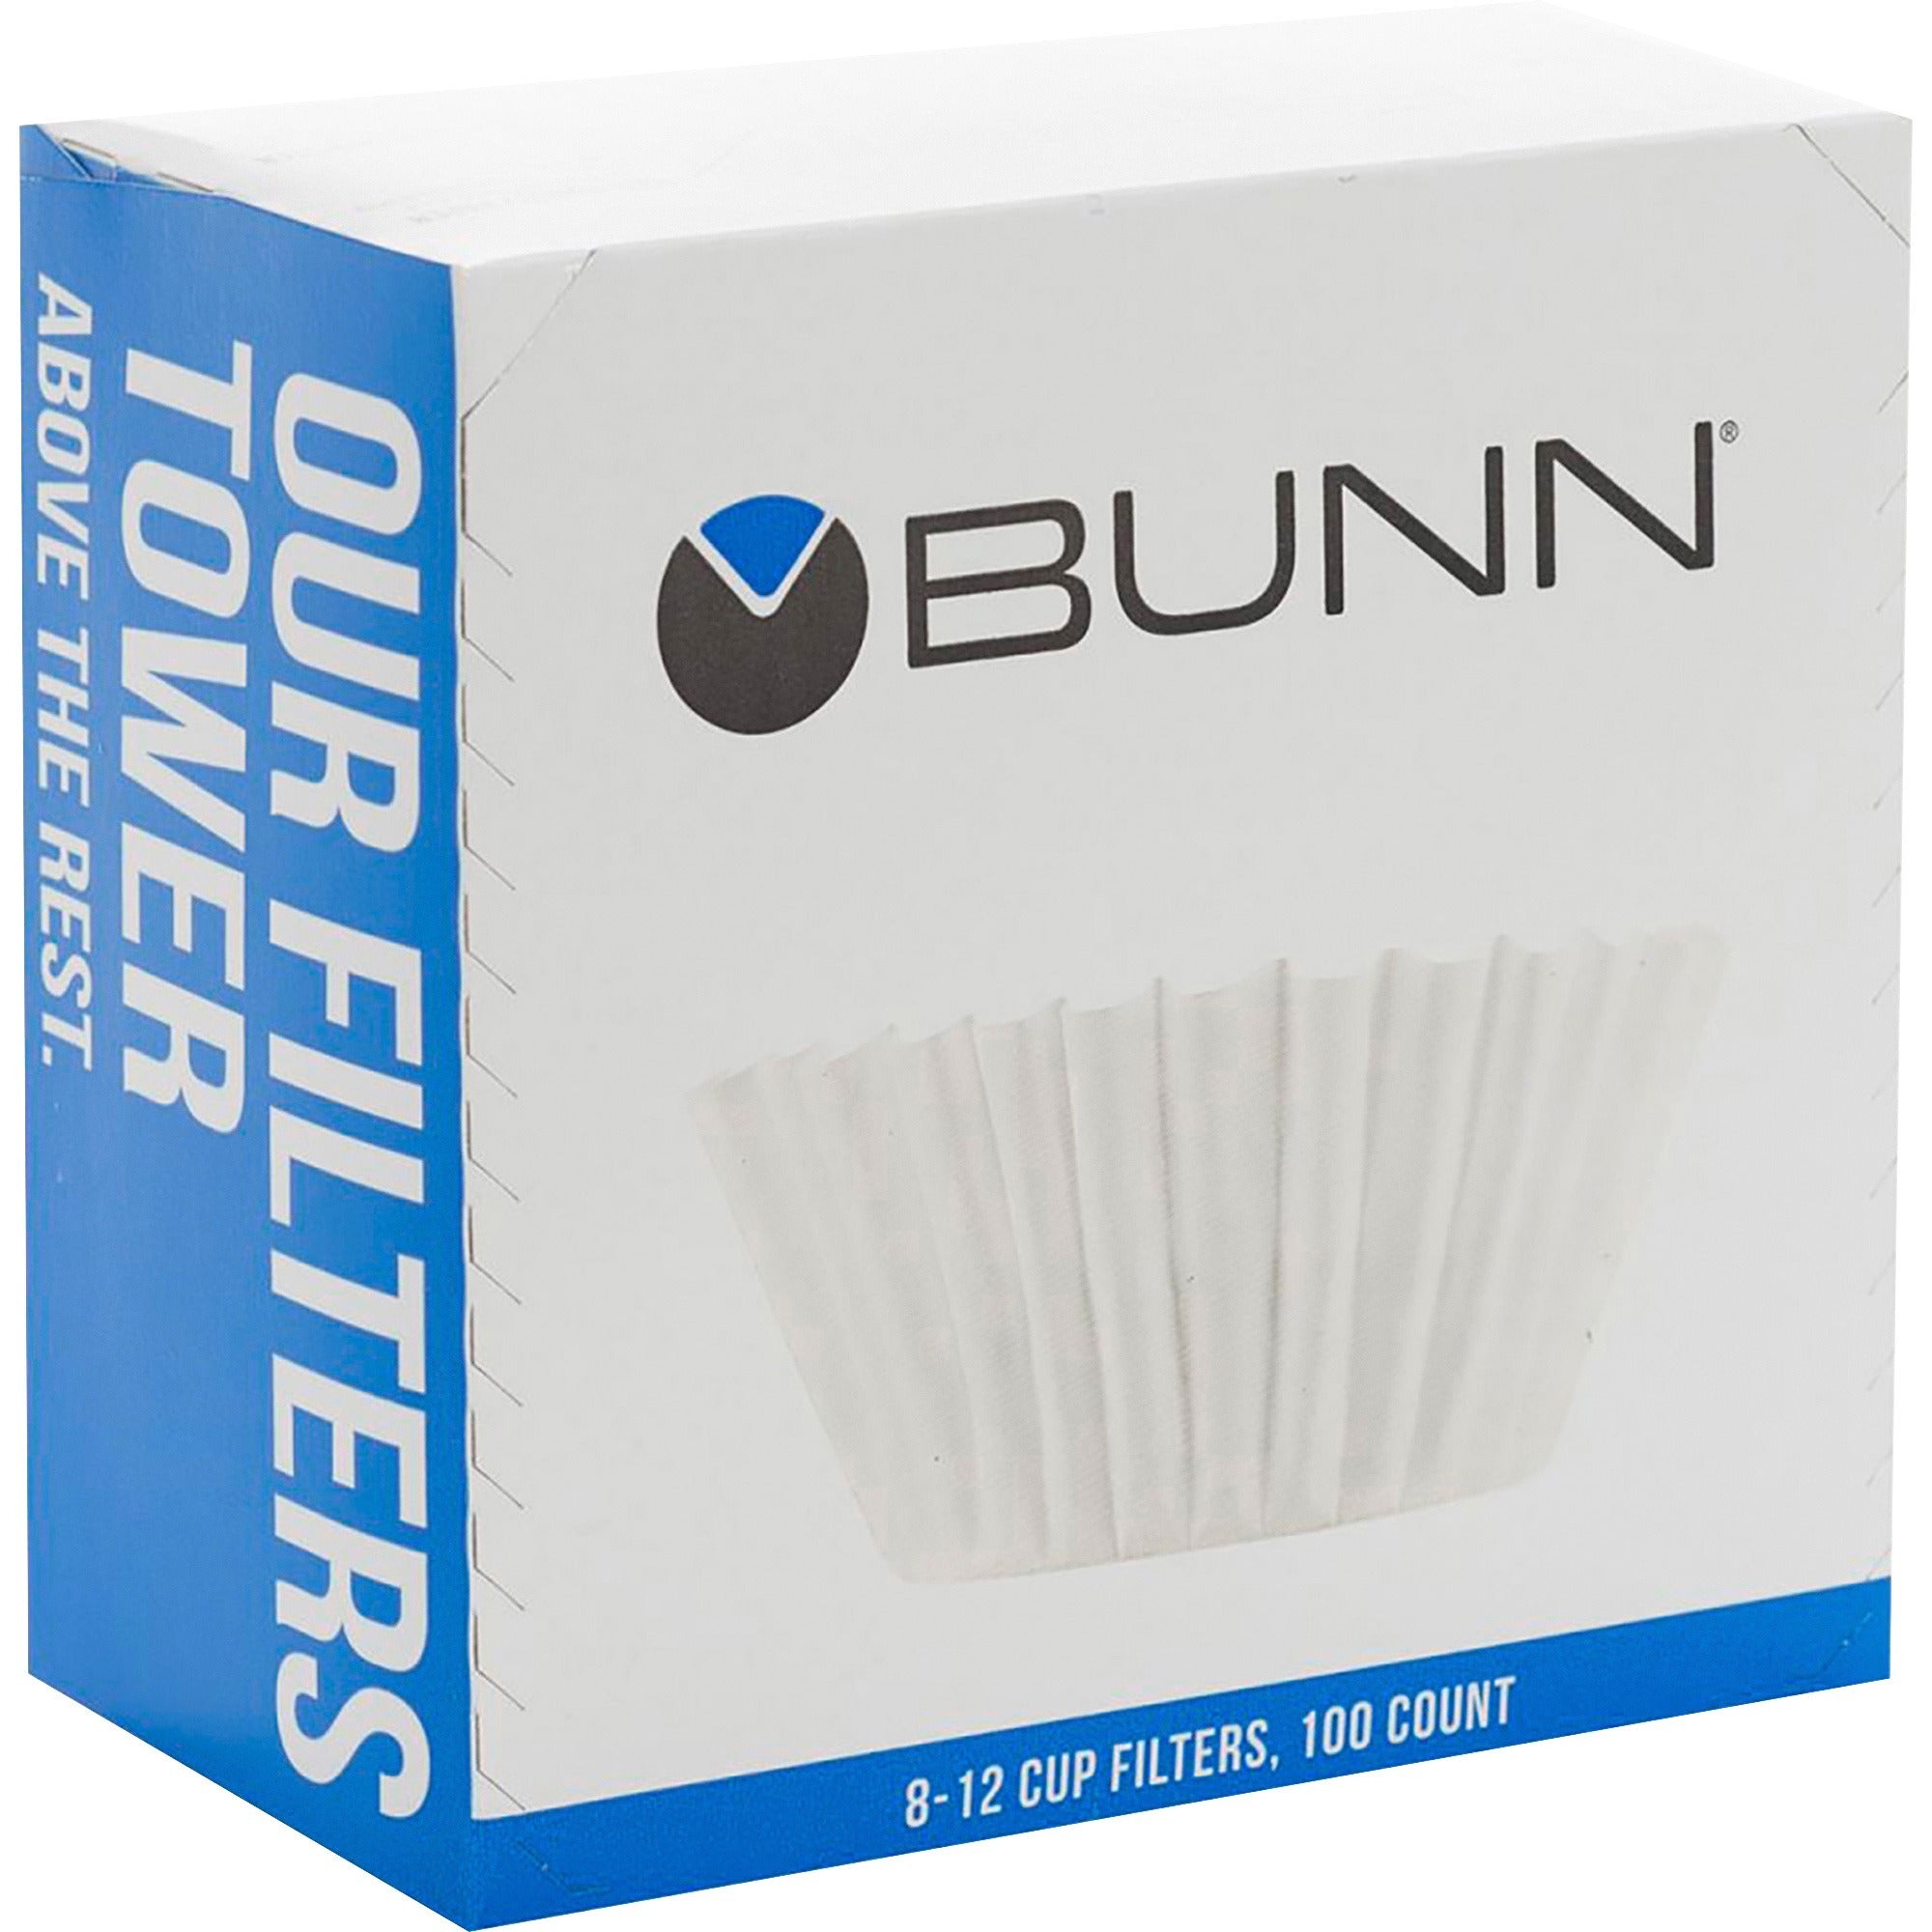 BUNN Home Brewer Coffee Filter, Sold as 1 Package, 100 Each per Package - 1